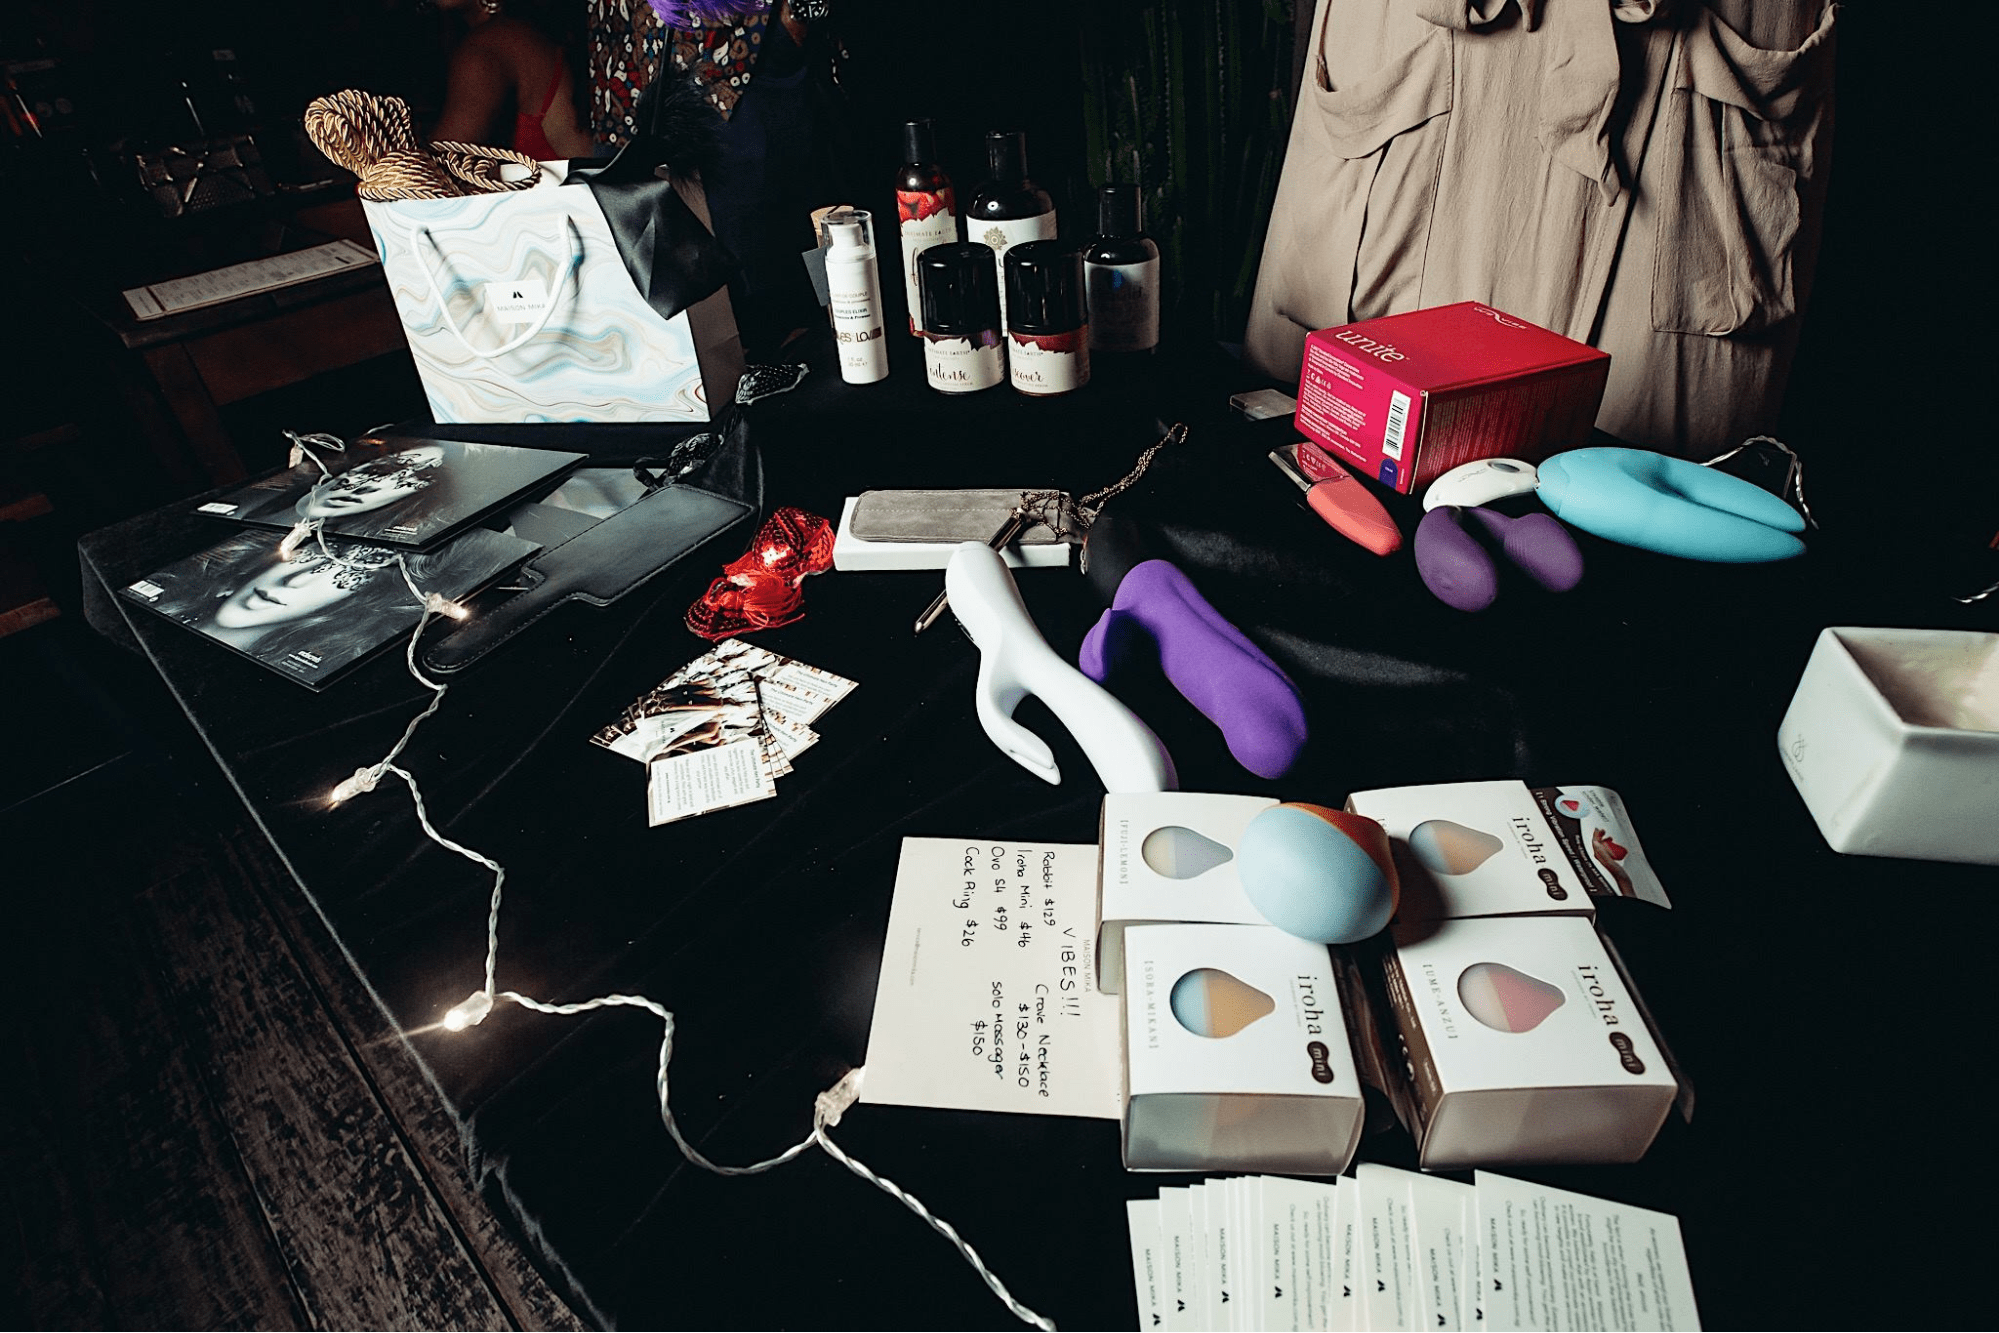 The Hedonist pop-up store